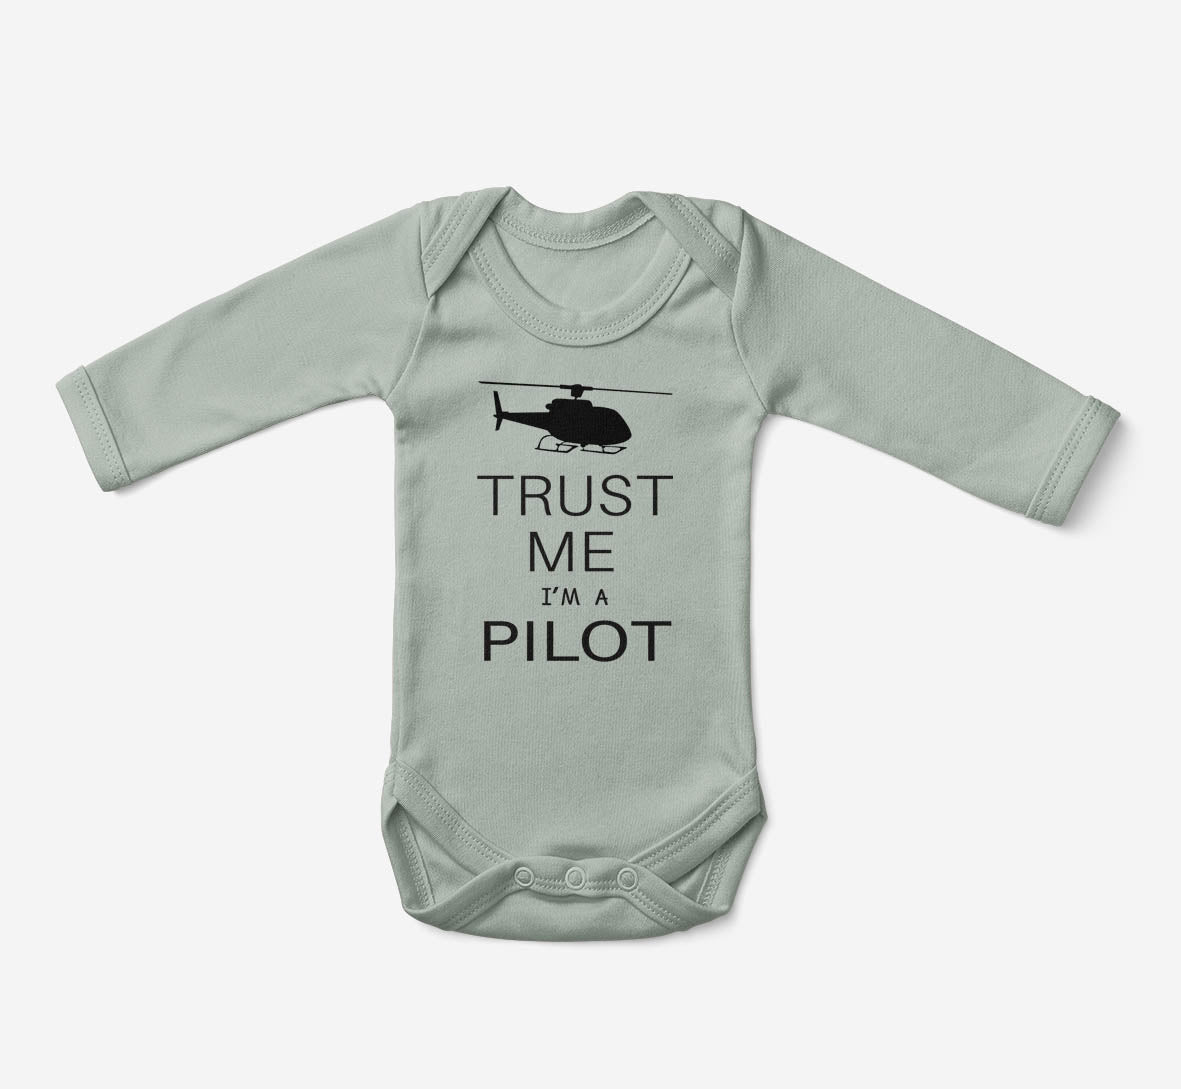 Trust Me I'm a Pilot (Helicopter) Designed Baby Bodysuits